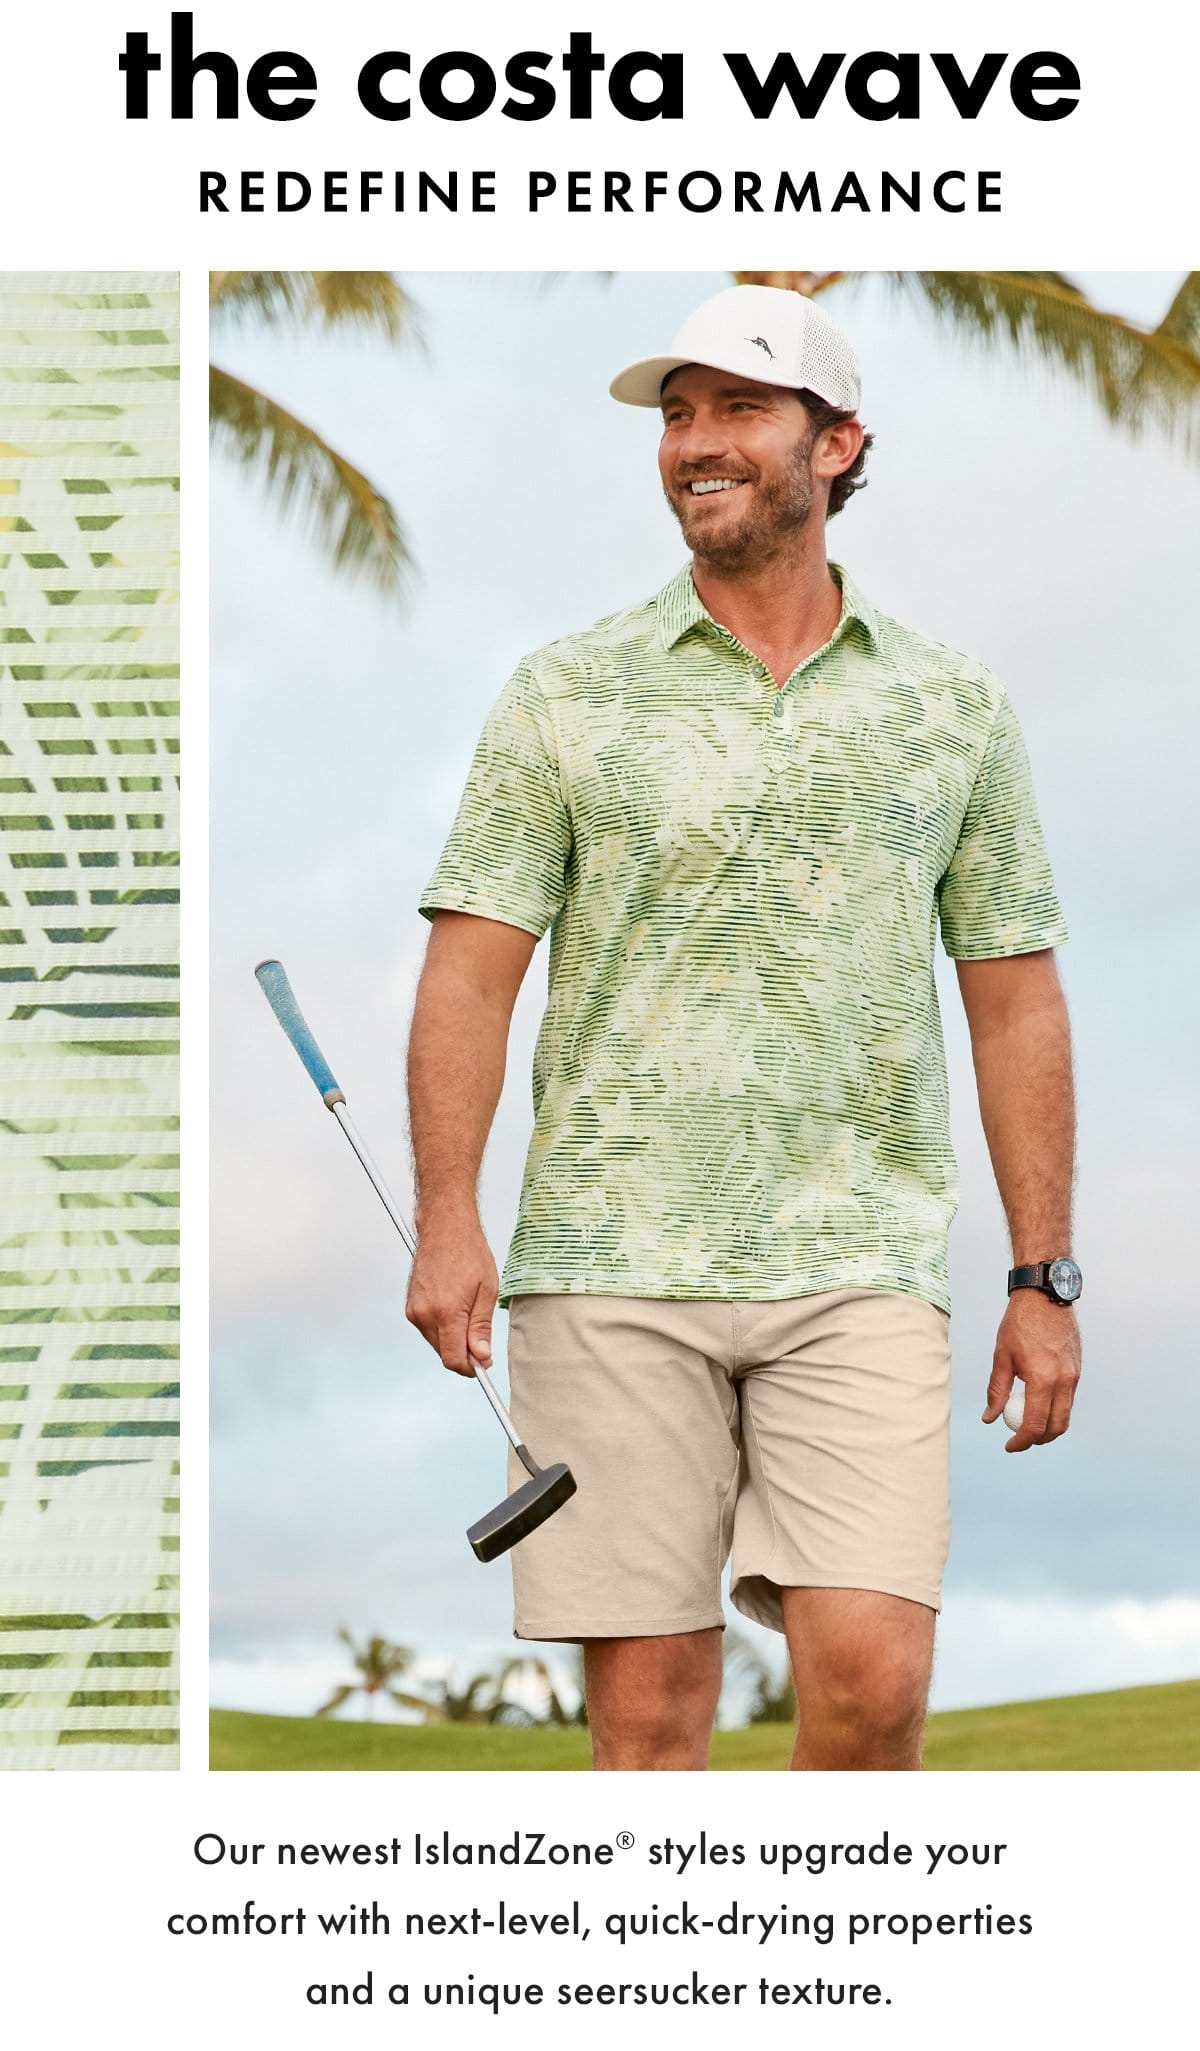 The Costa Wave redefine performance. Our newest IslandZone styles upgrade your comfort with next-level, quick-drying properties and a unique seersucker texture.